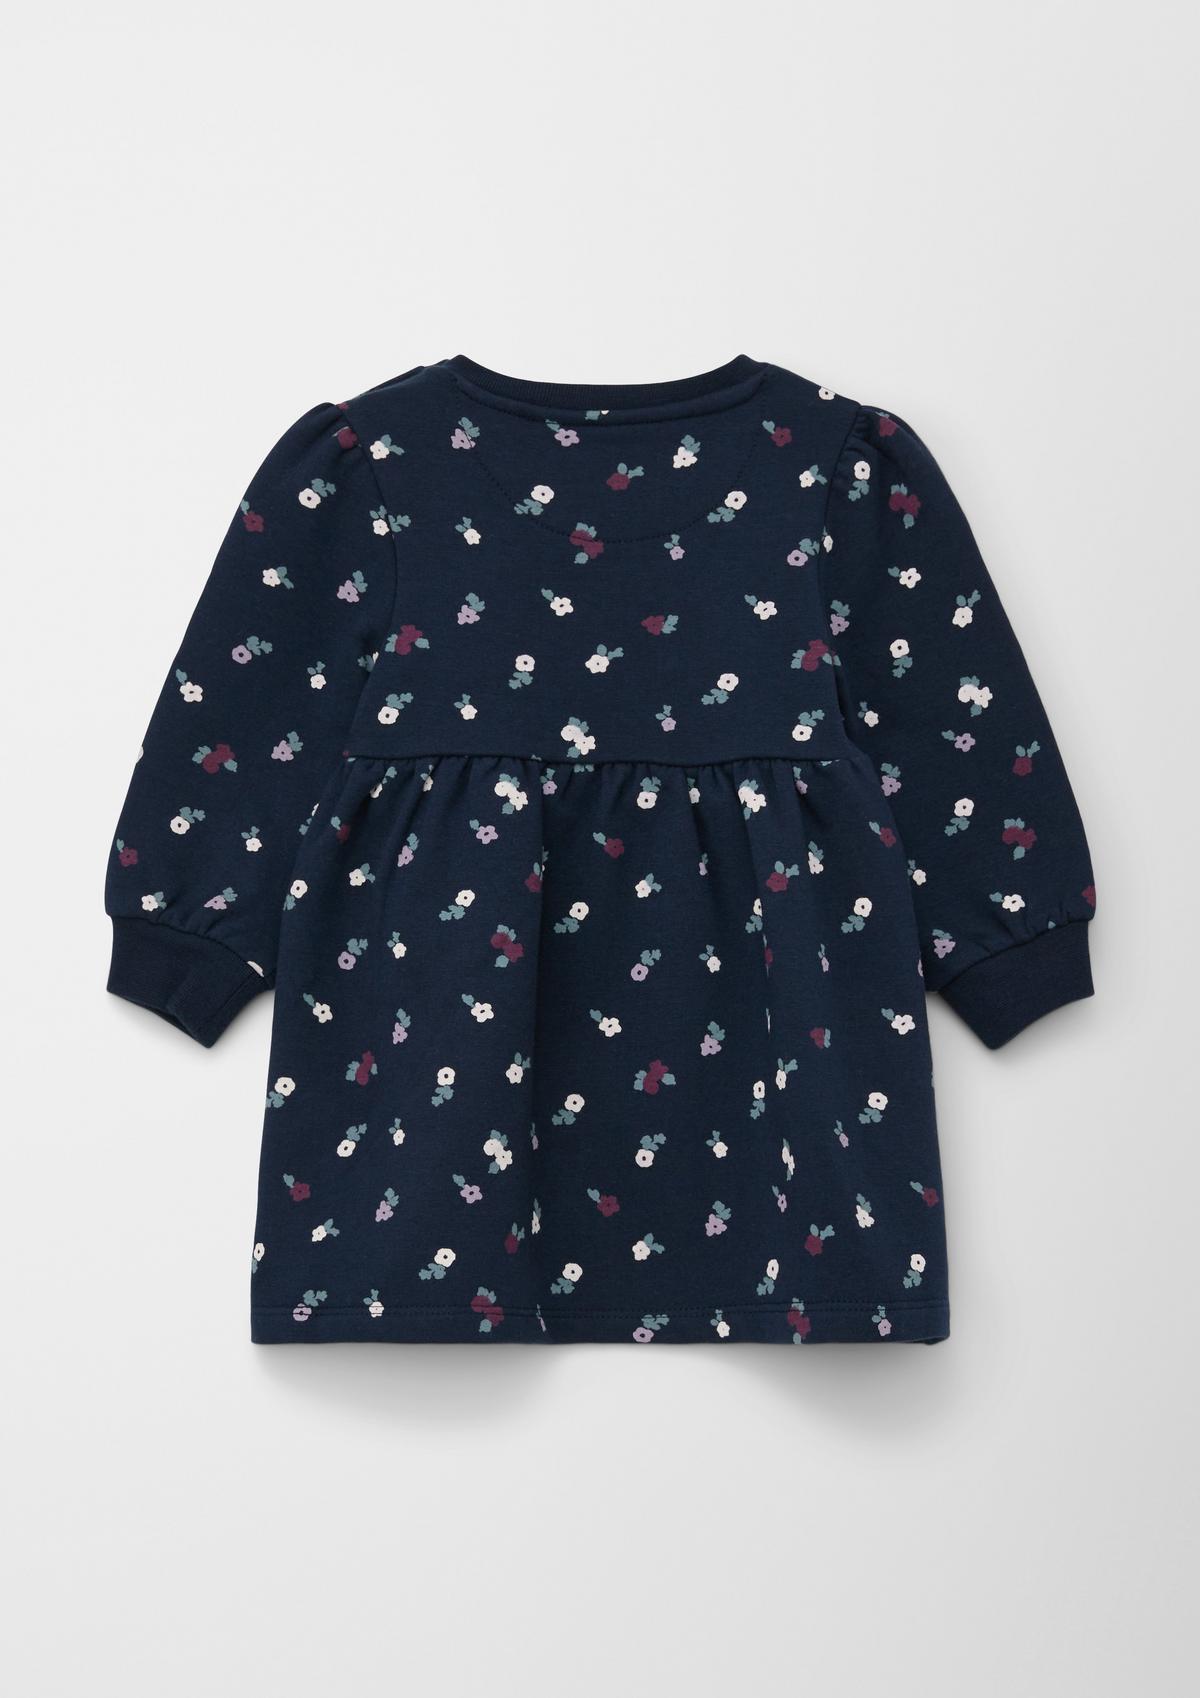 s.Oliver Sweatshirt dress with a floral pattern